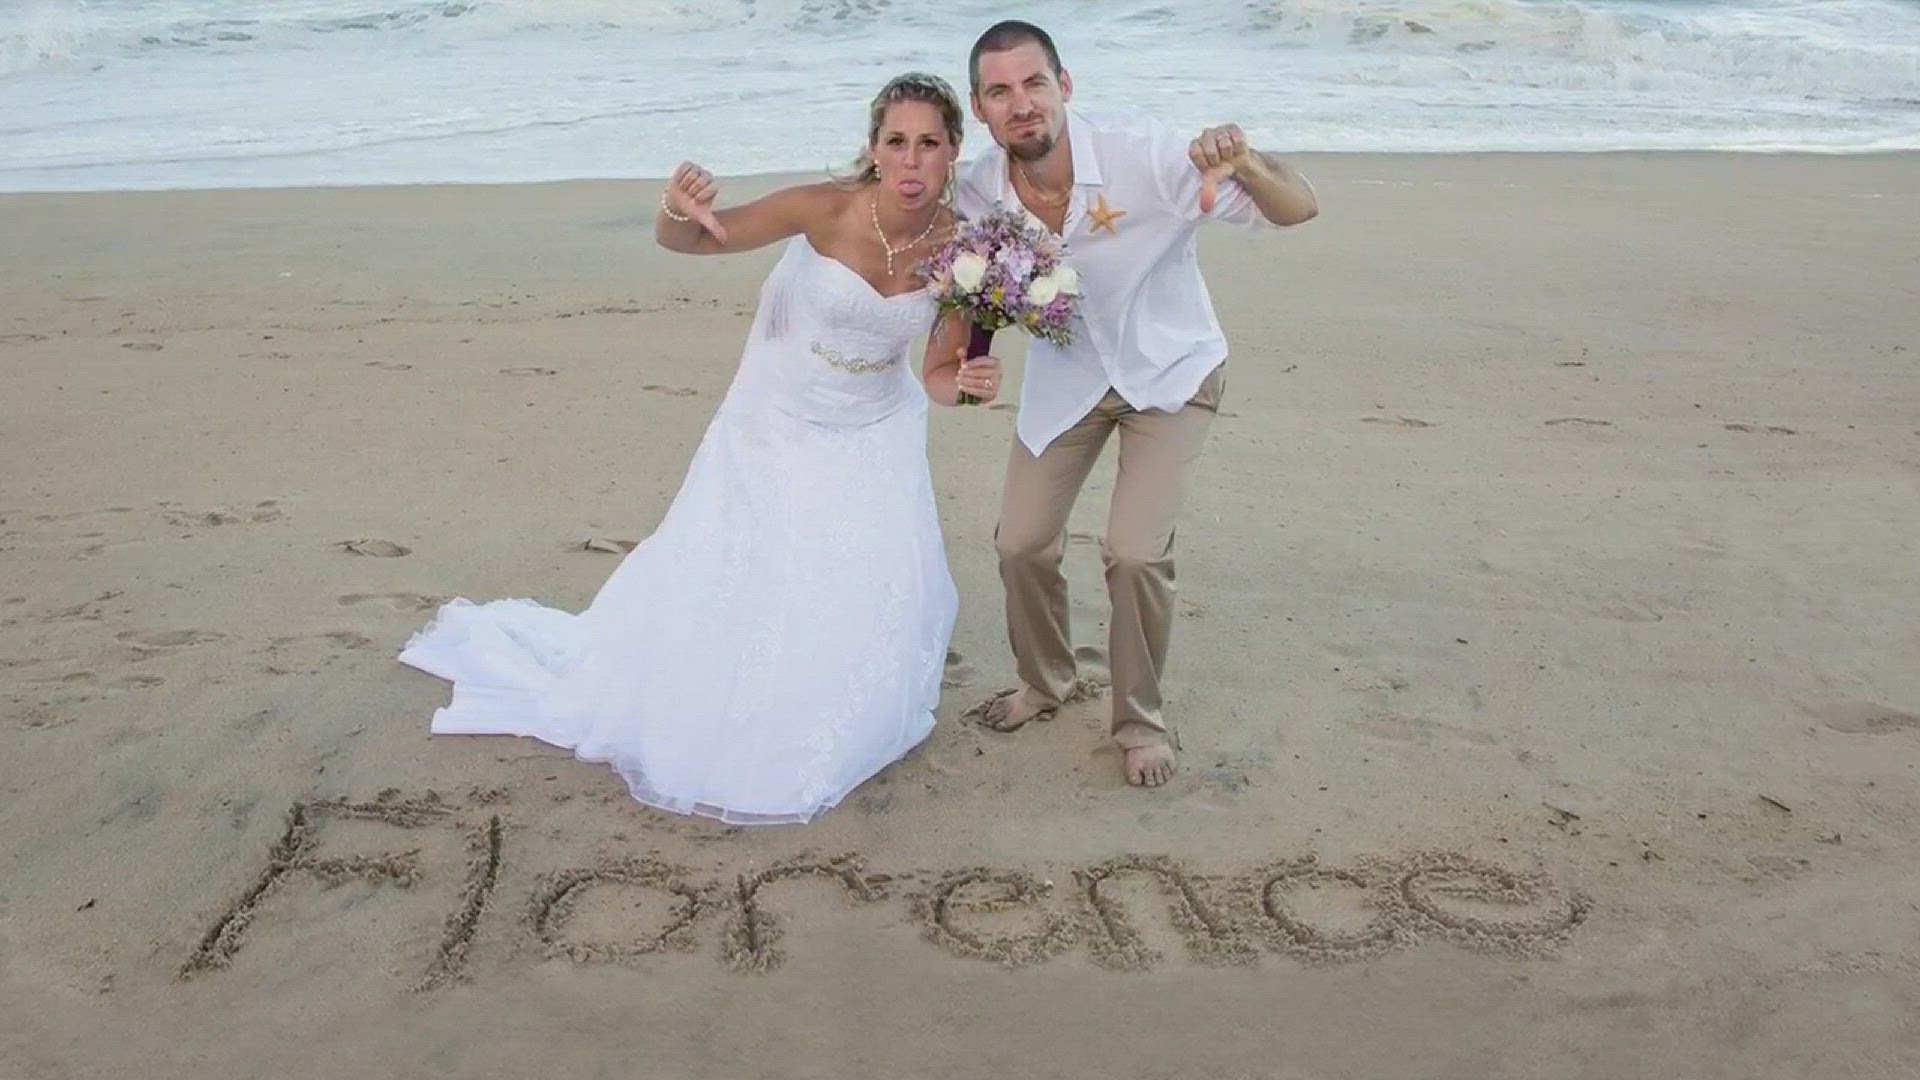 Leah and Brandon Frick were supposed to get married on the Outer Banks on Friday, but Hurricane Florence diverted their plans.